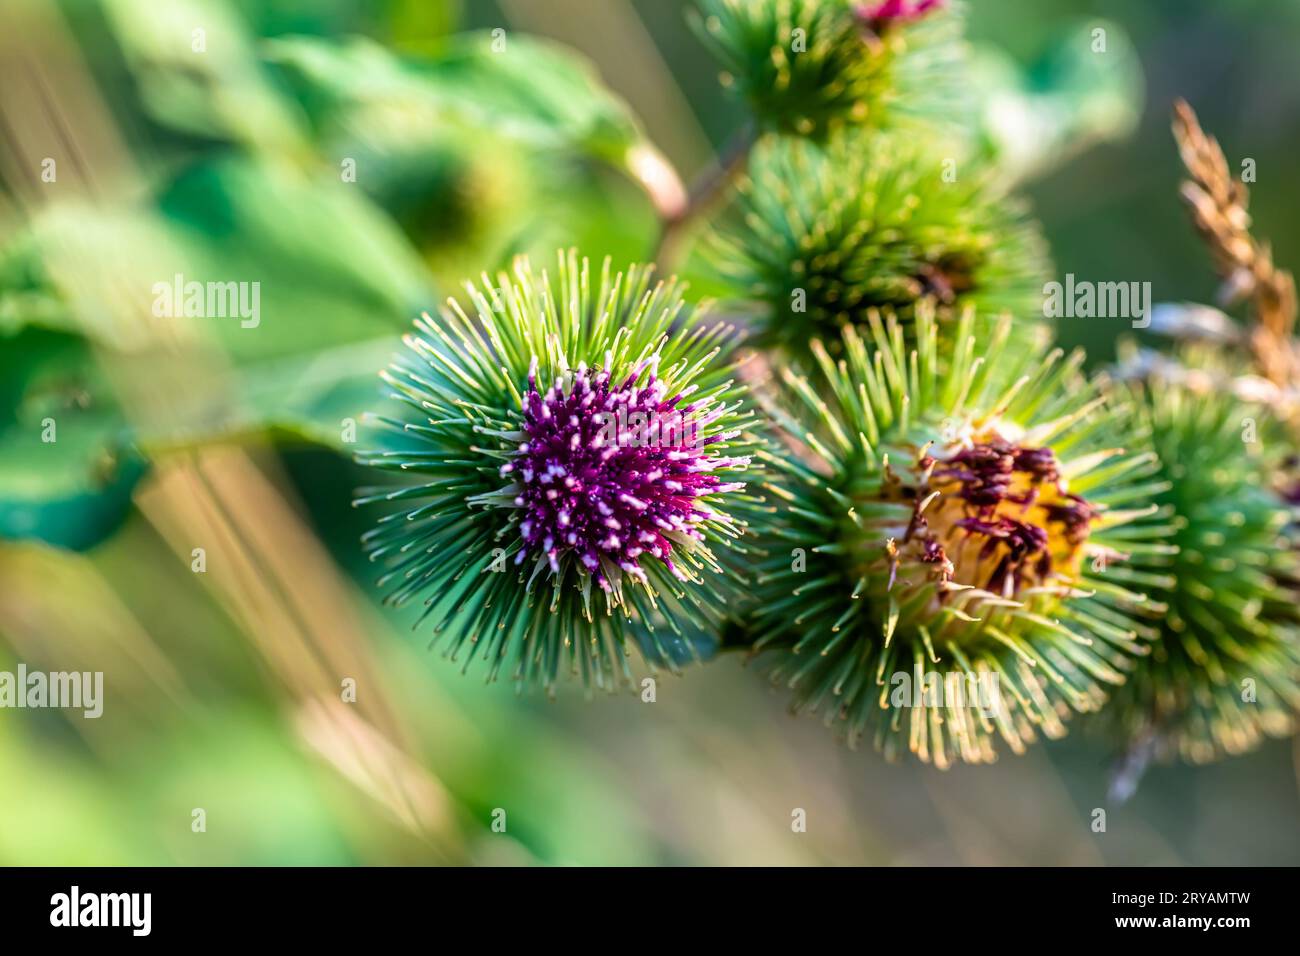 Cirsium vulgare, spear thistle, bull thistle, or common thistle plant provides great deal of nectar for pollinators. inflorescence pink-purple with Stock Photo